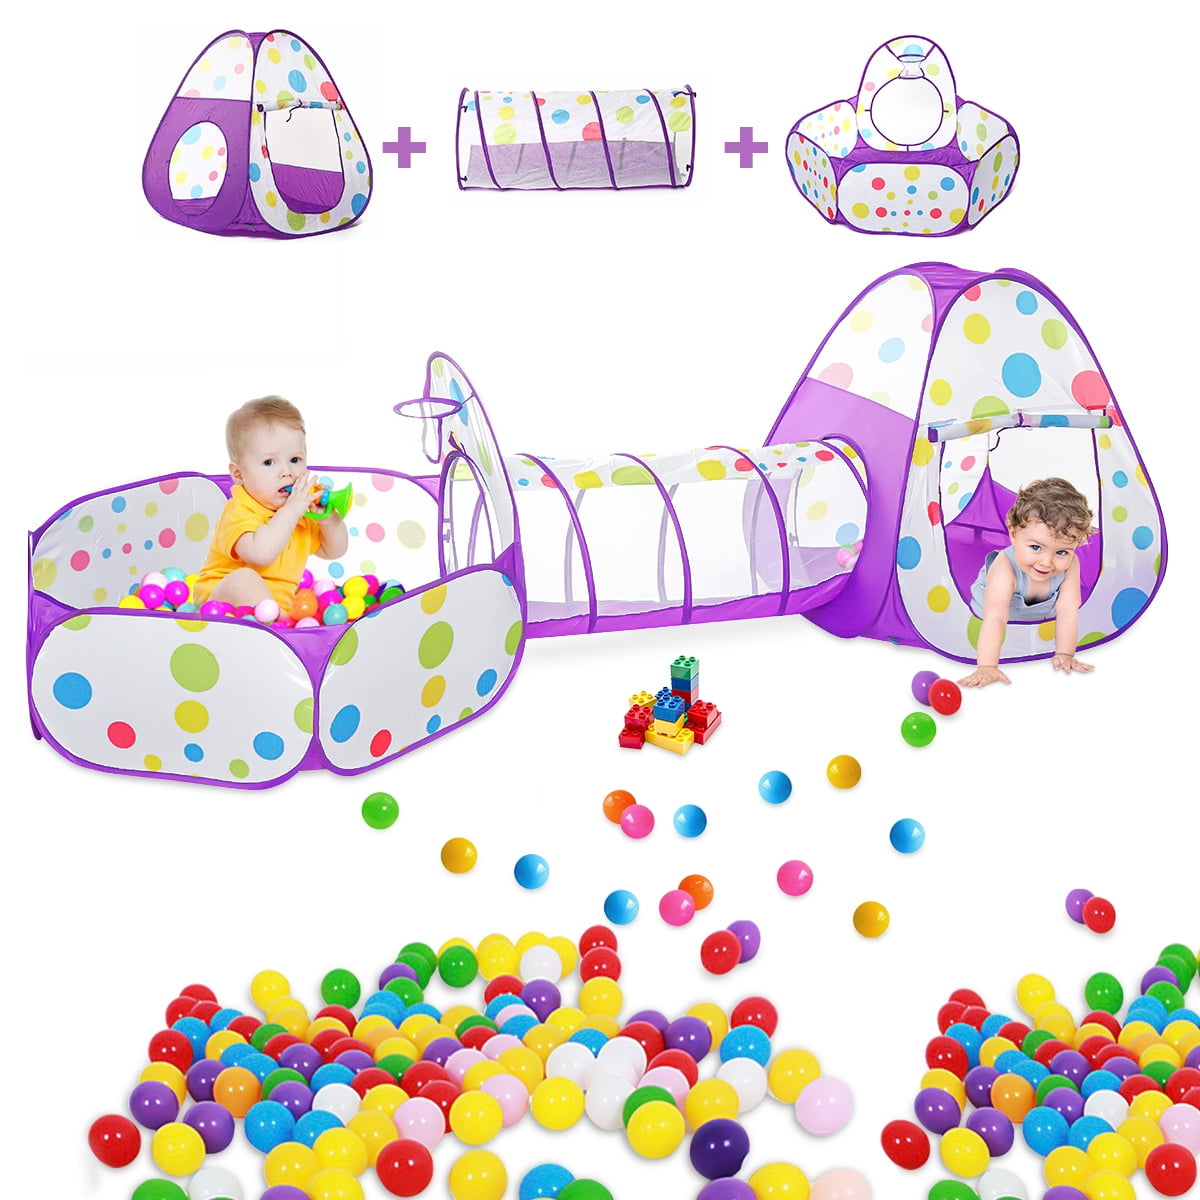 FURNIFE 3pcs Princess Castle Play Tent Crawl Tunnel and Ball Pit with Basketball Hoop for Girls Boys Babies Toddlers Indoor & Outdoor Foldable Kids Playhouse 